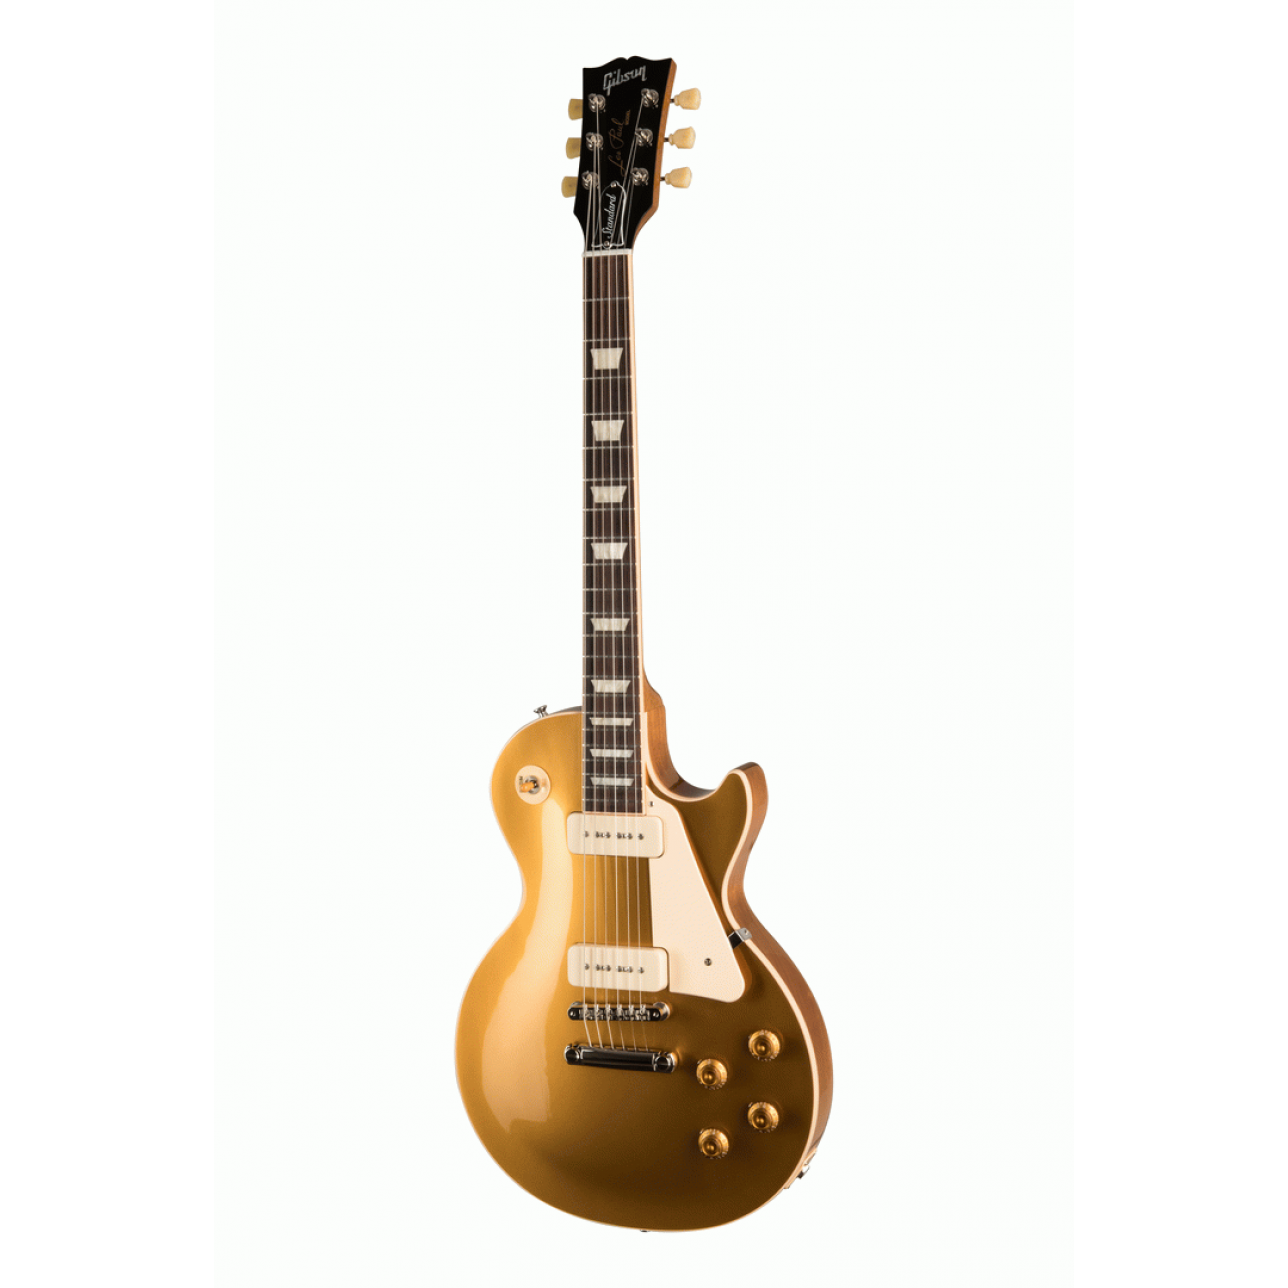 GIBSON LES PAUL STANDARD 50s - GOLD TOP - P90s